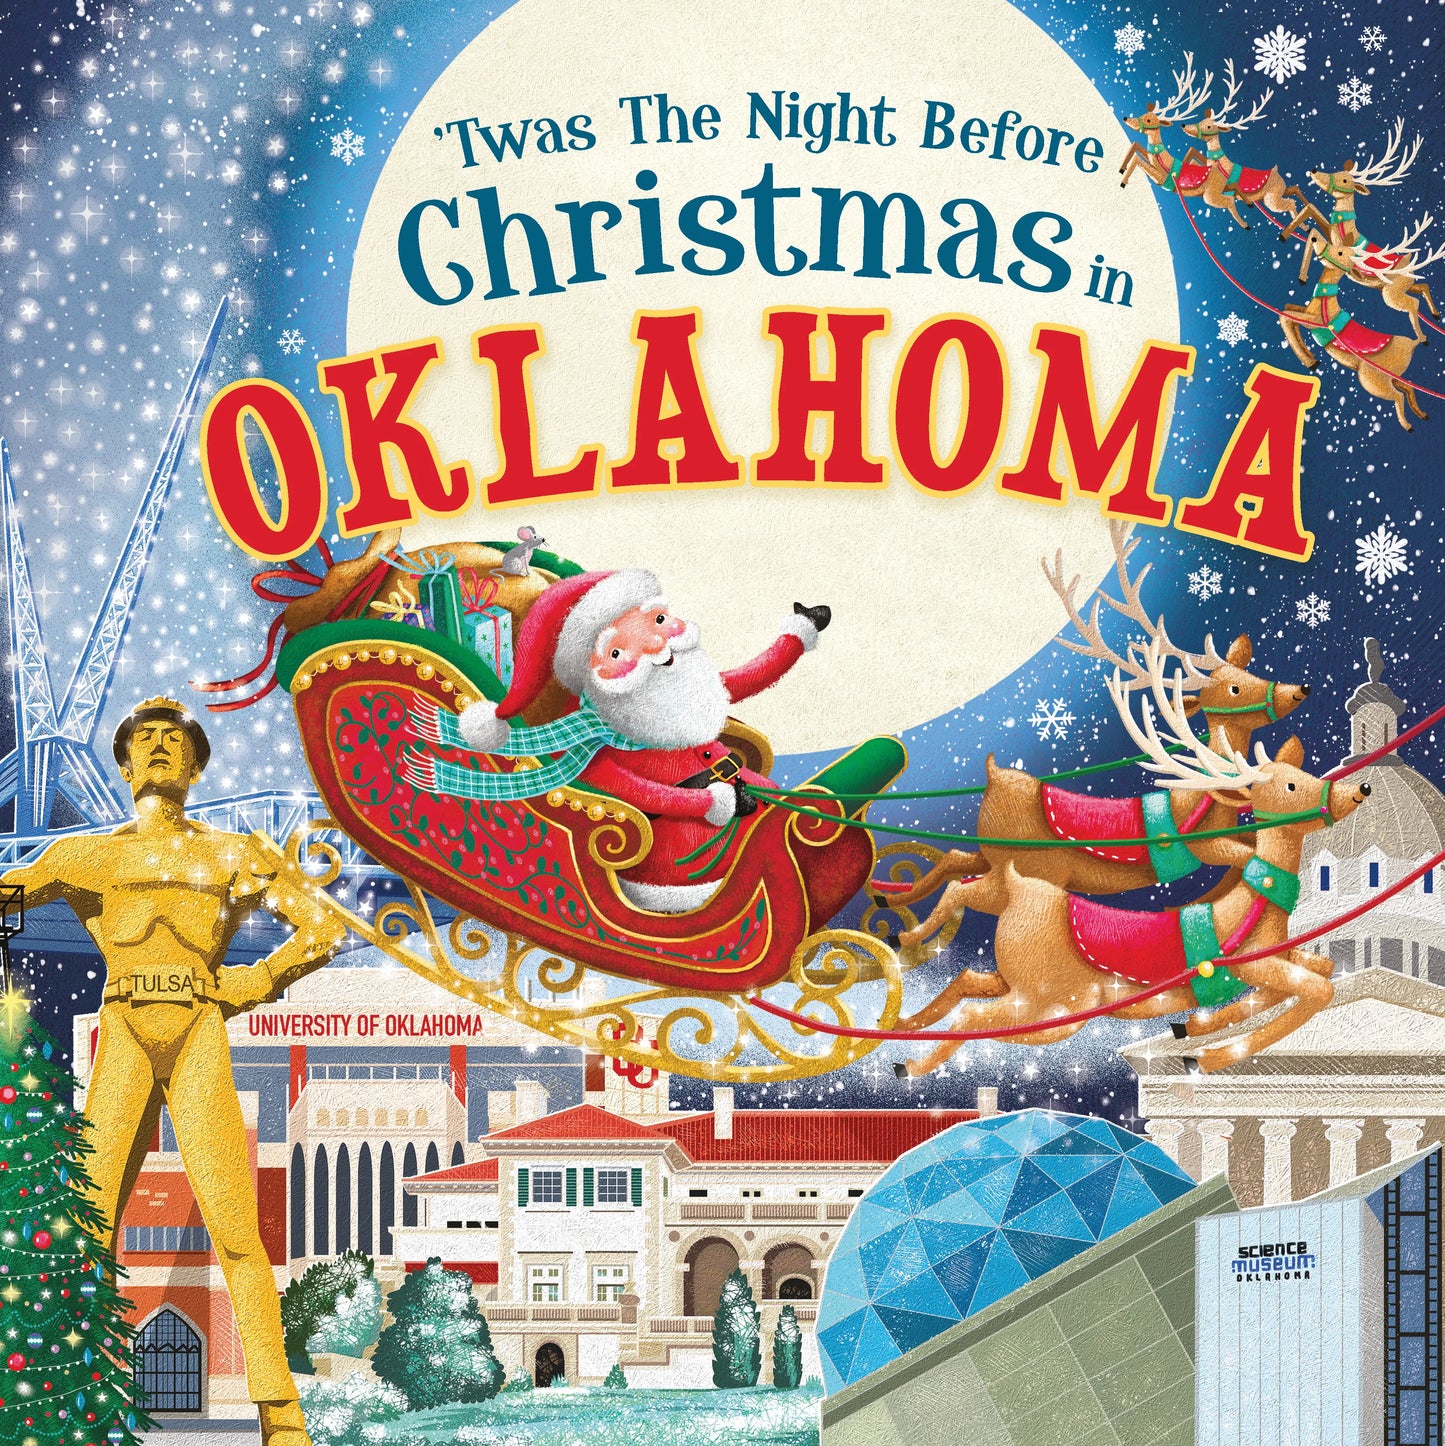 'Twas the Night Before Christmas in Oklahoma